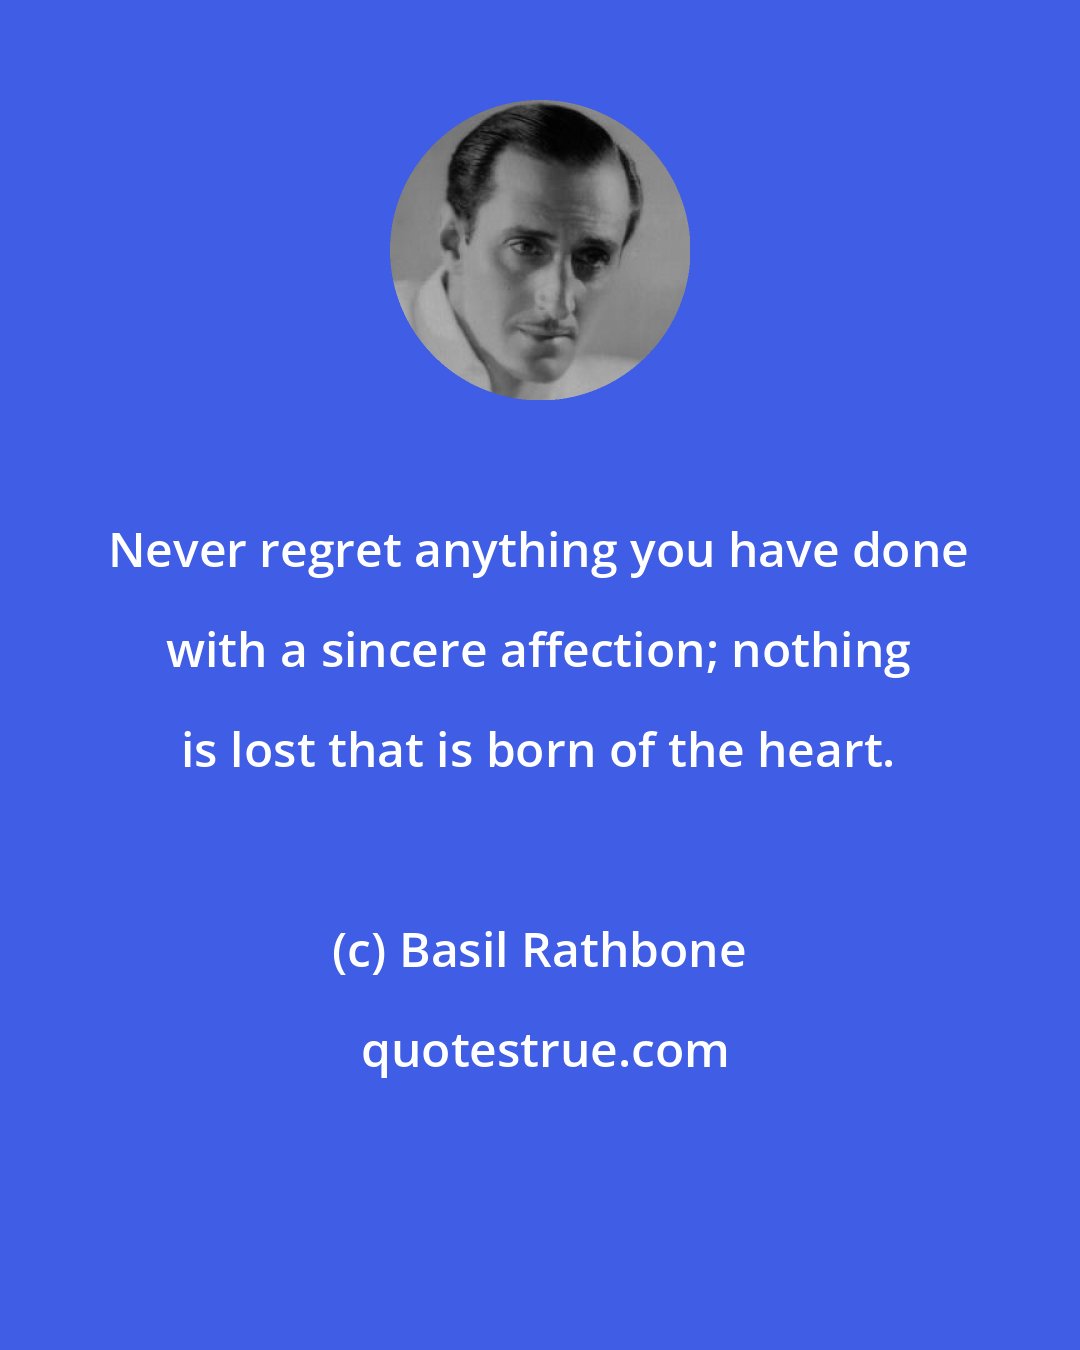 Basil Rathbone: Never regret anything you have done with a sincere affection; nothing is lost that is born of the heart.